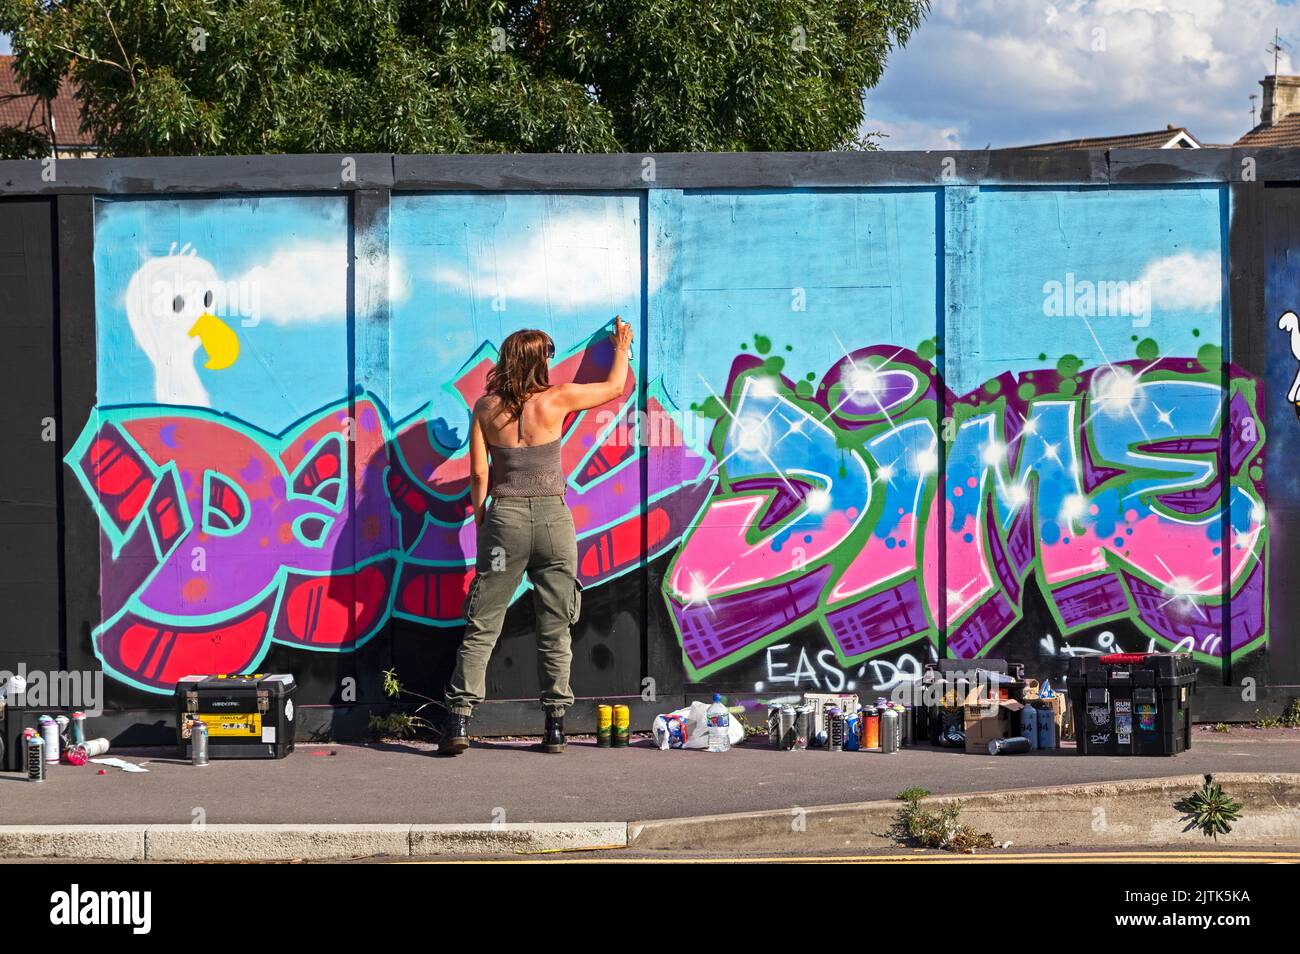 Weston-super-Mare, UK, 27 August 2022, An artist at work at a paint jam at the site of the town’s former police station. The police station was demolished in 2019 and the site is awaiting redevelopment. Stock Photo